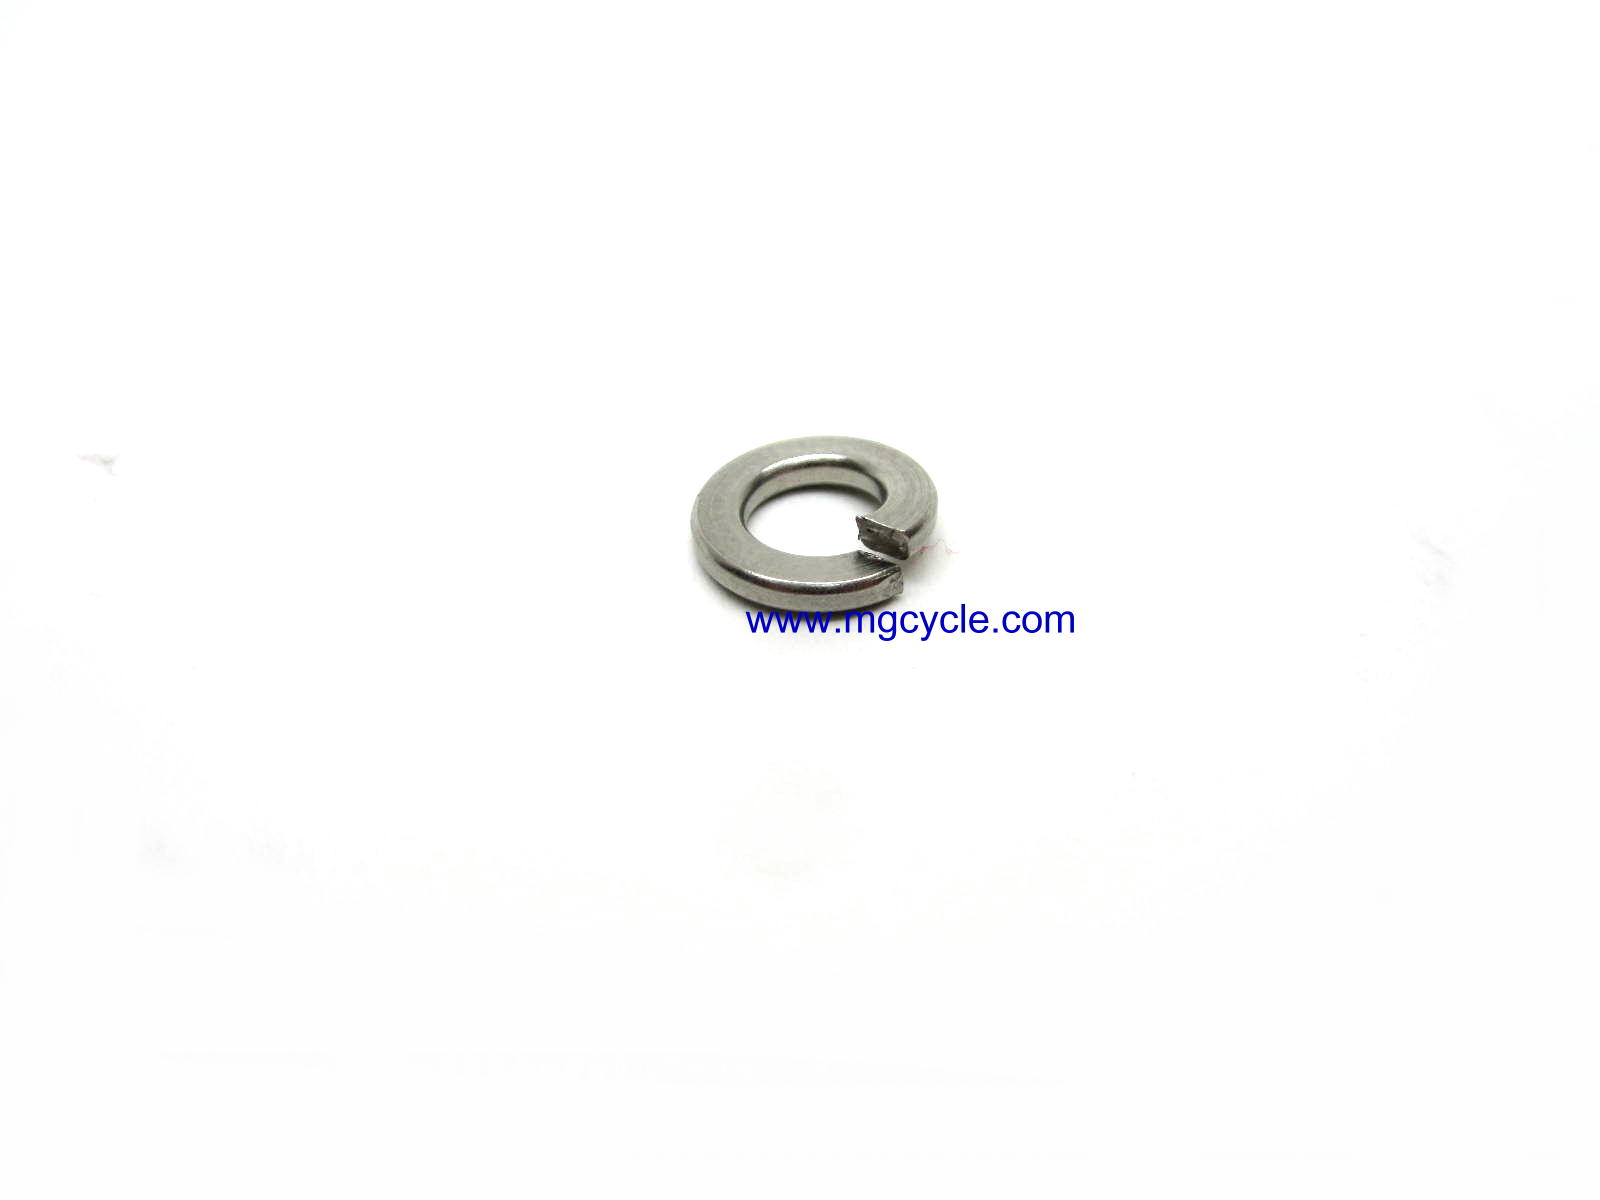 6mm stainless split lock washer - Click Image to Close